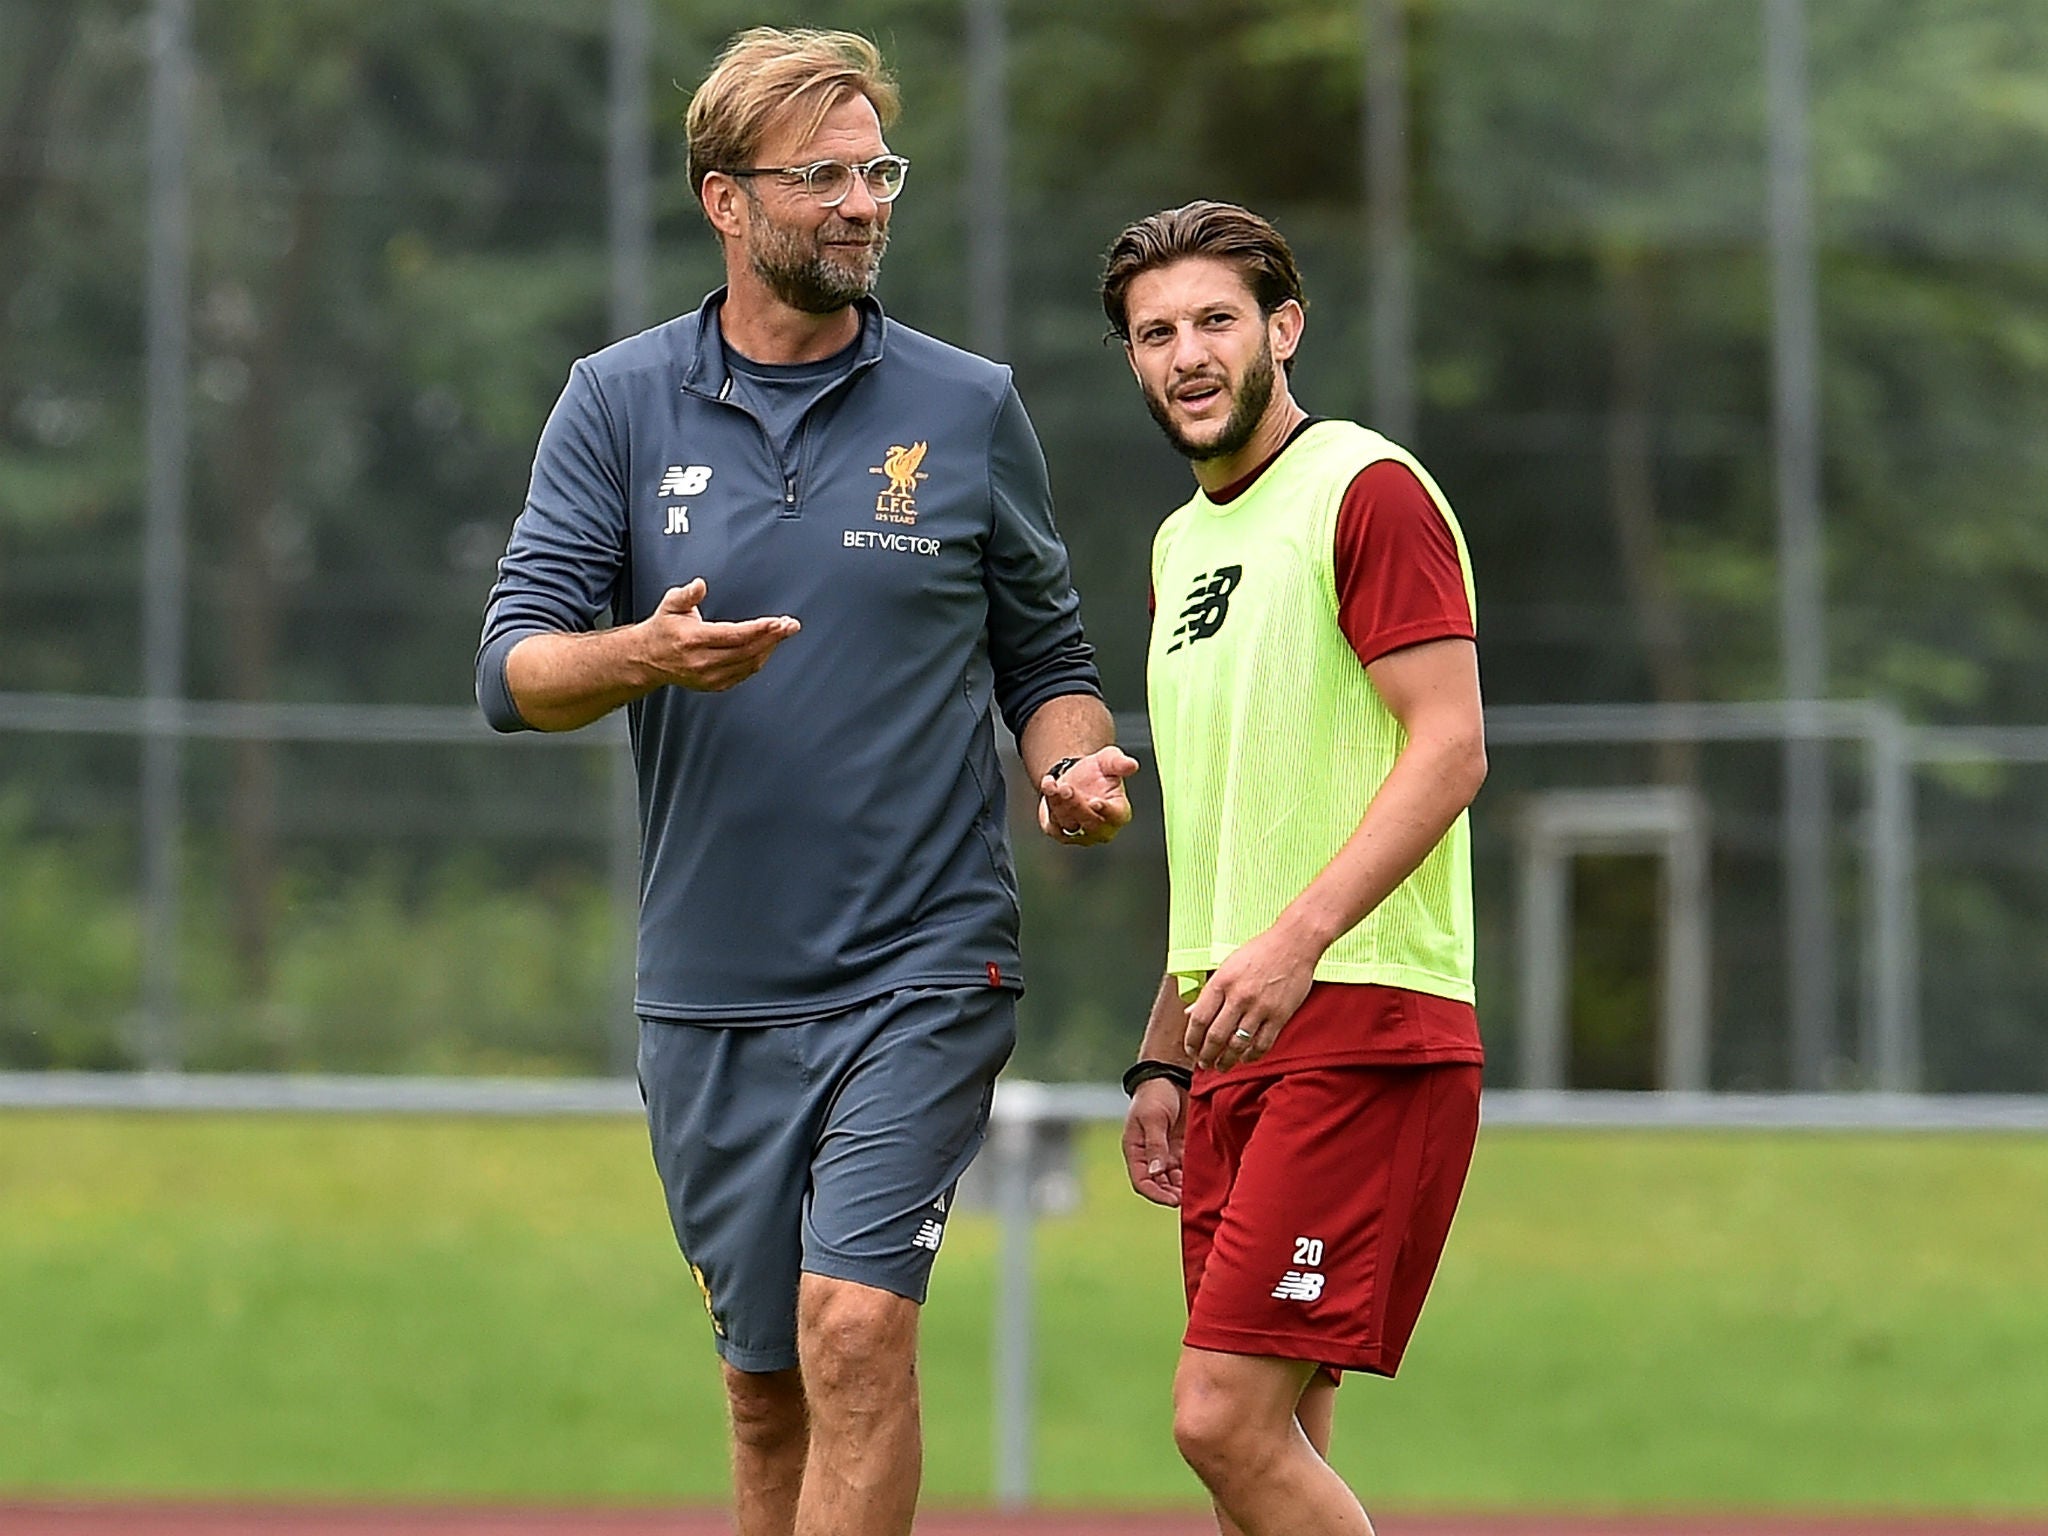 Lallana is currently out injured but is expected back in November